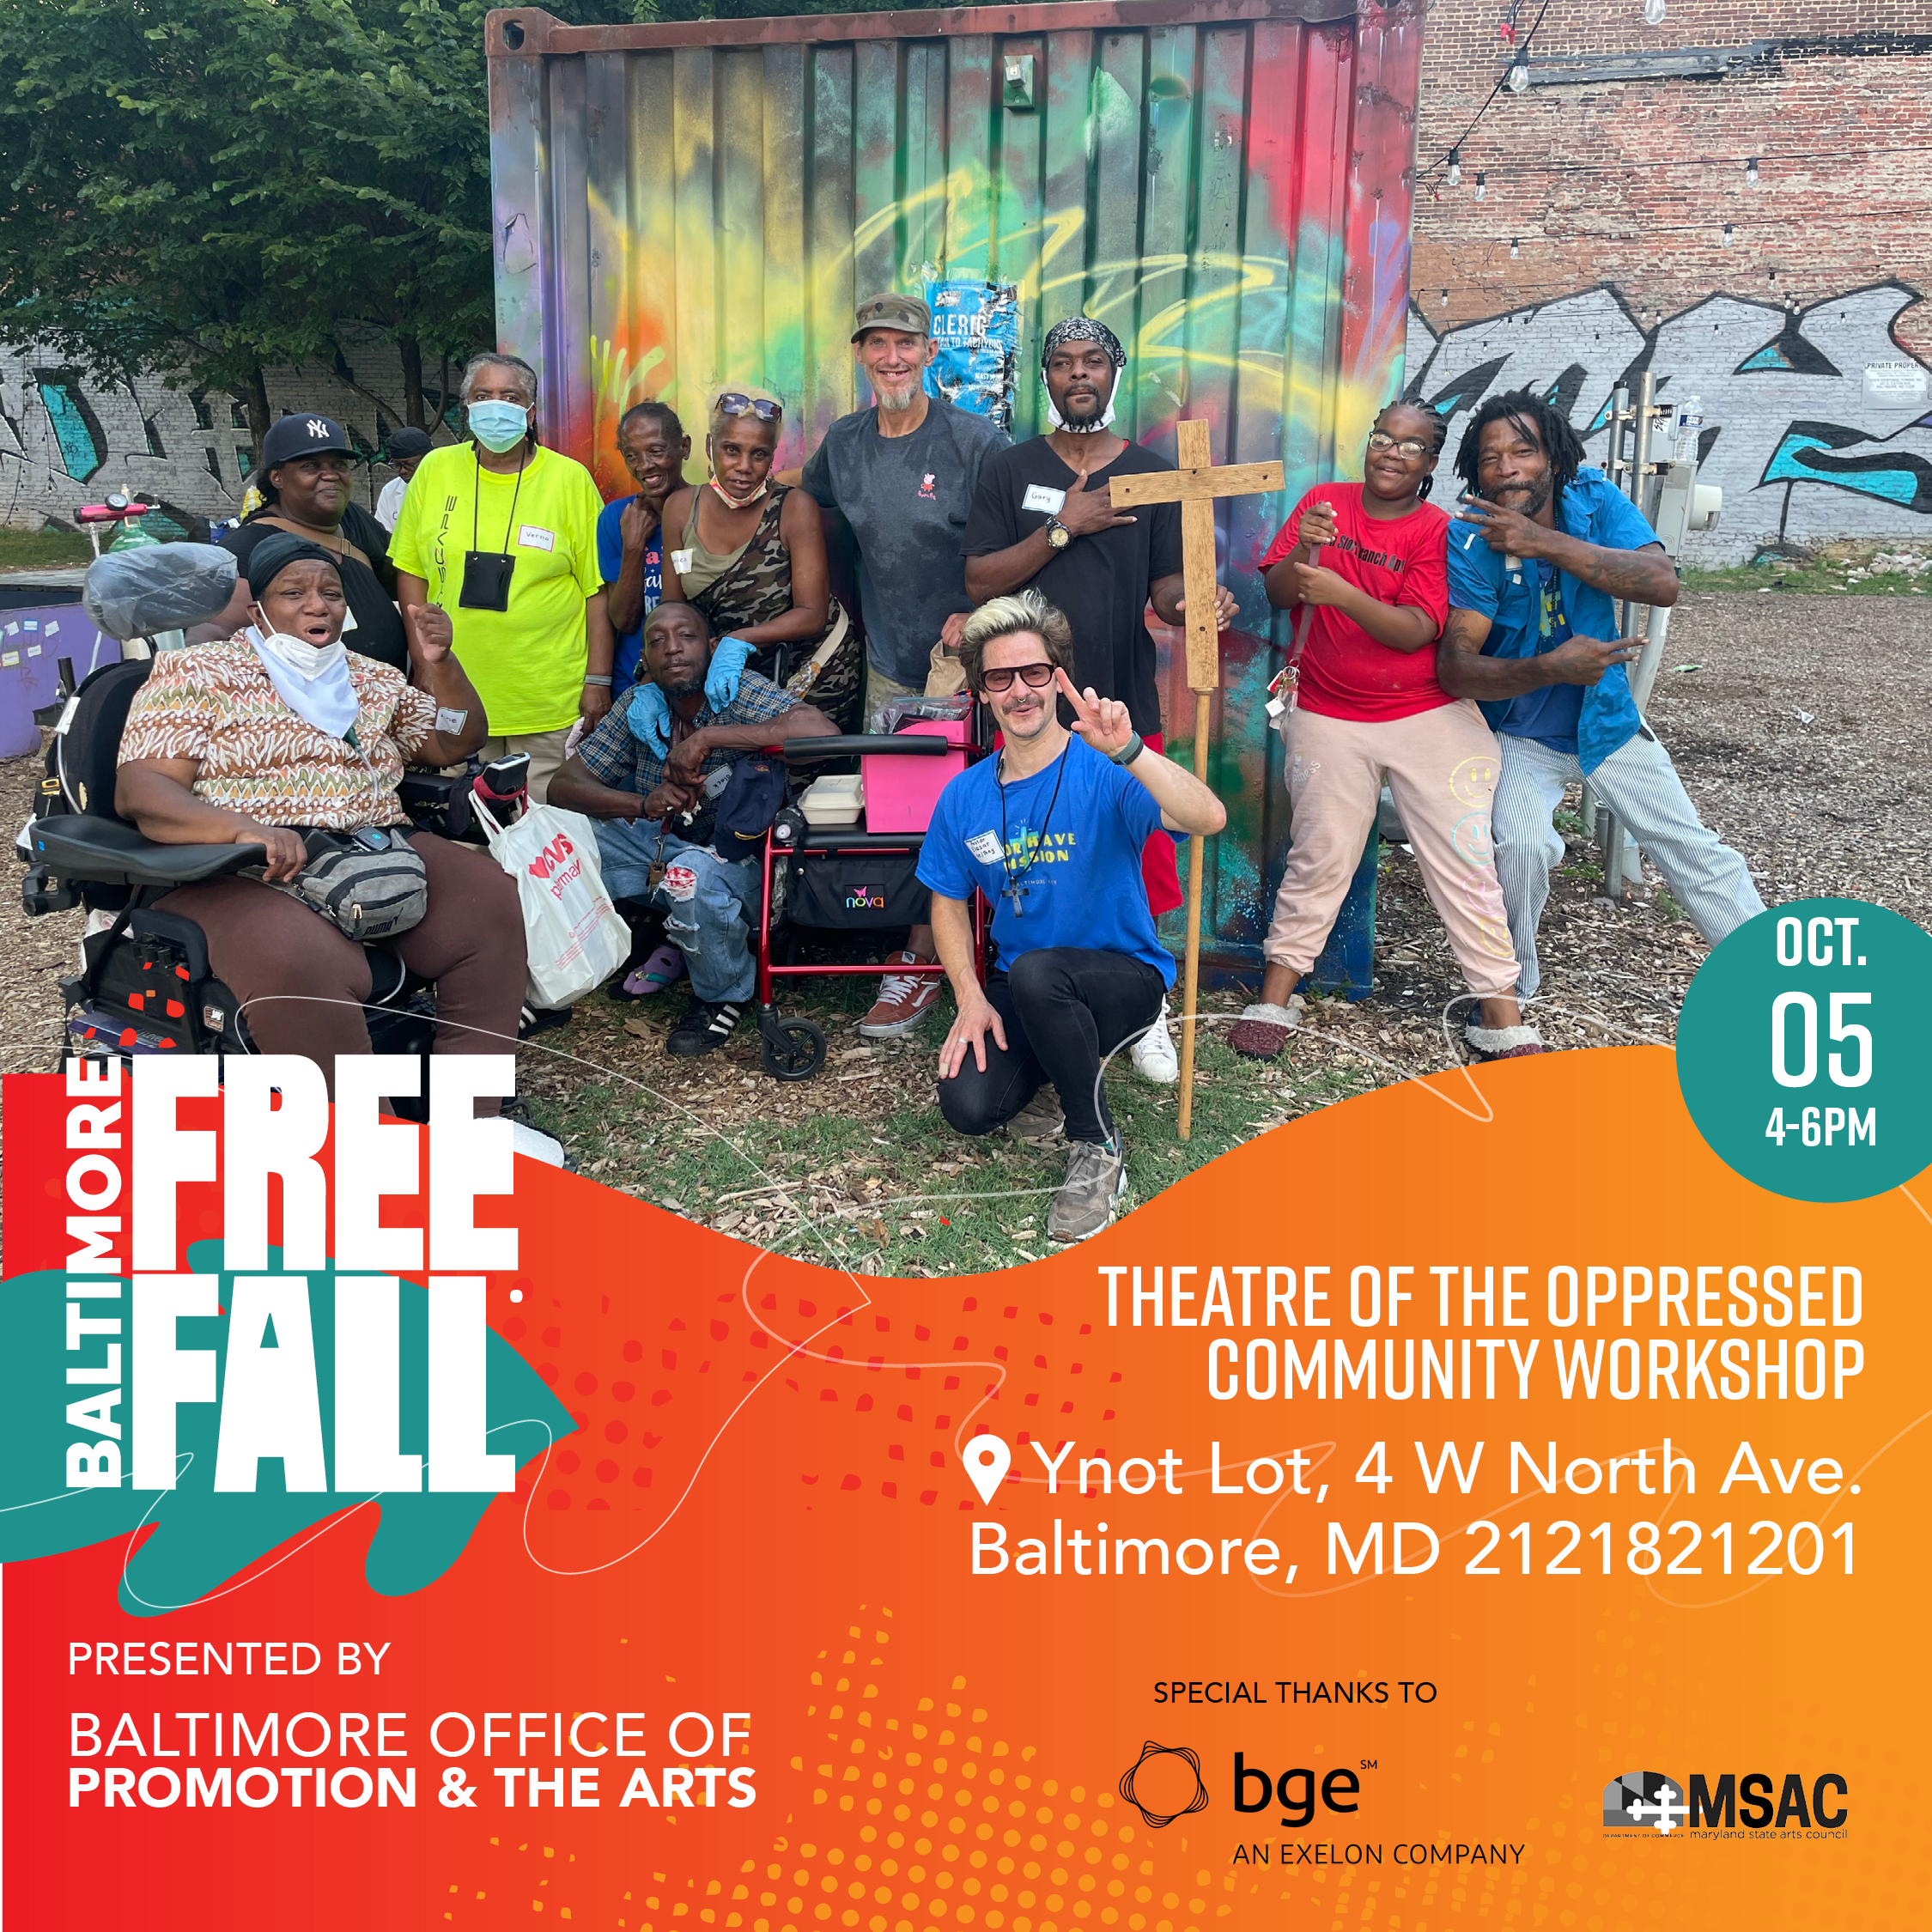 Theatre of the Oppressed Community Workshop